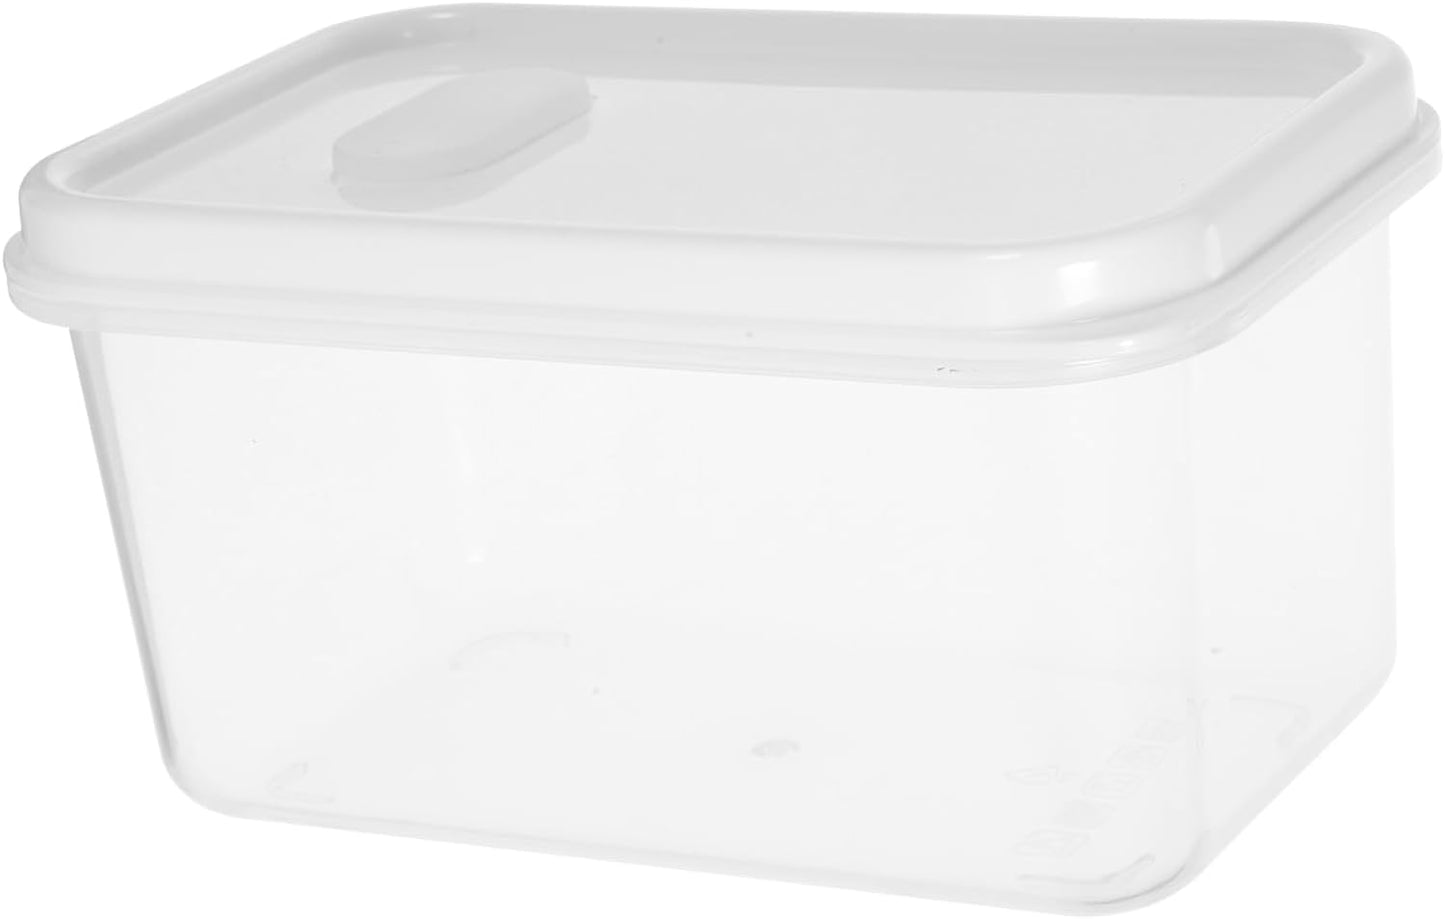 Box Toast Storage Box Cereal Container Kitchen Storage Canister Grain Storage Canister Plastic Grain Jar Plastic Storage Containers with Lids Food Plastic Jar  TIDTALEO As Shown 1  